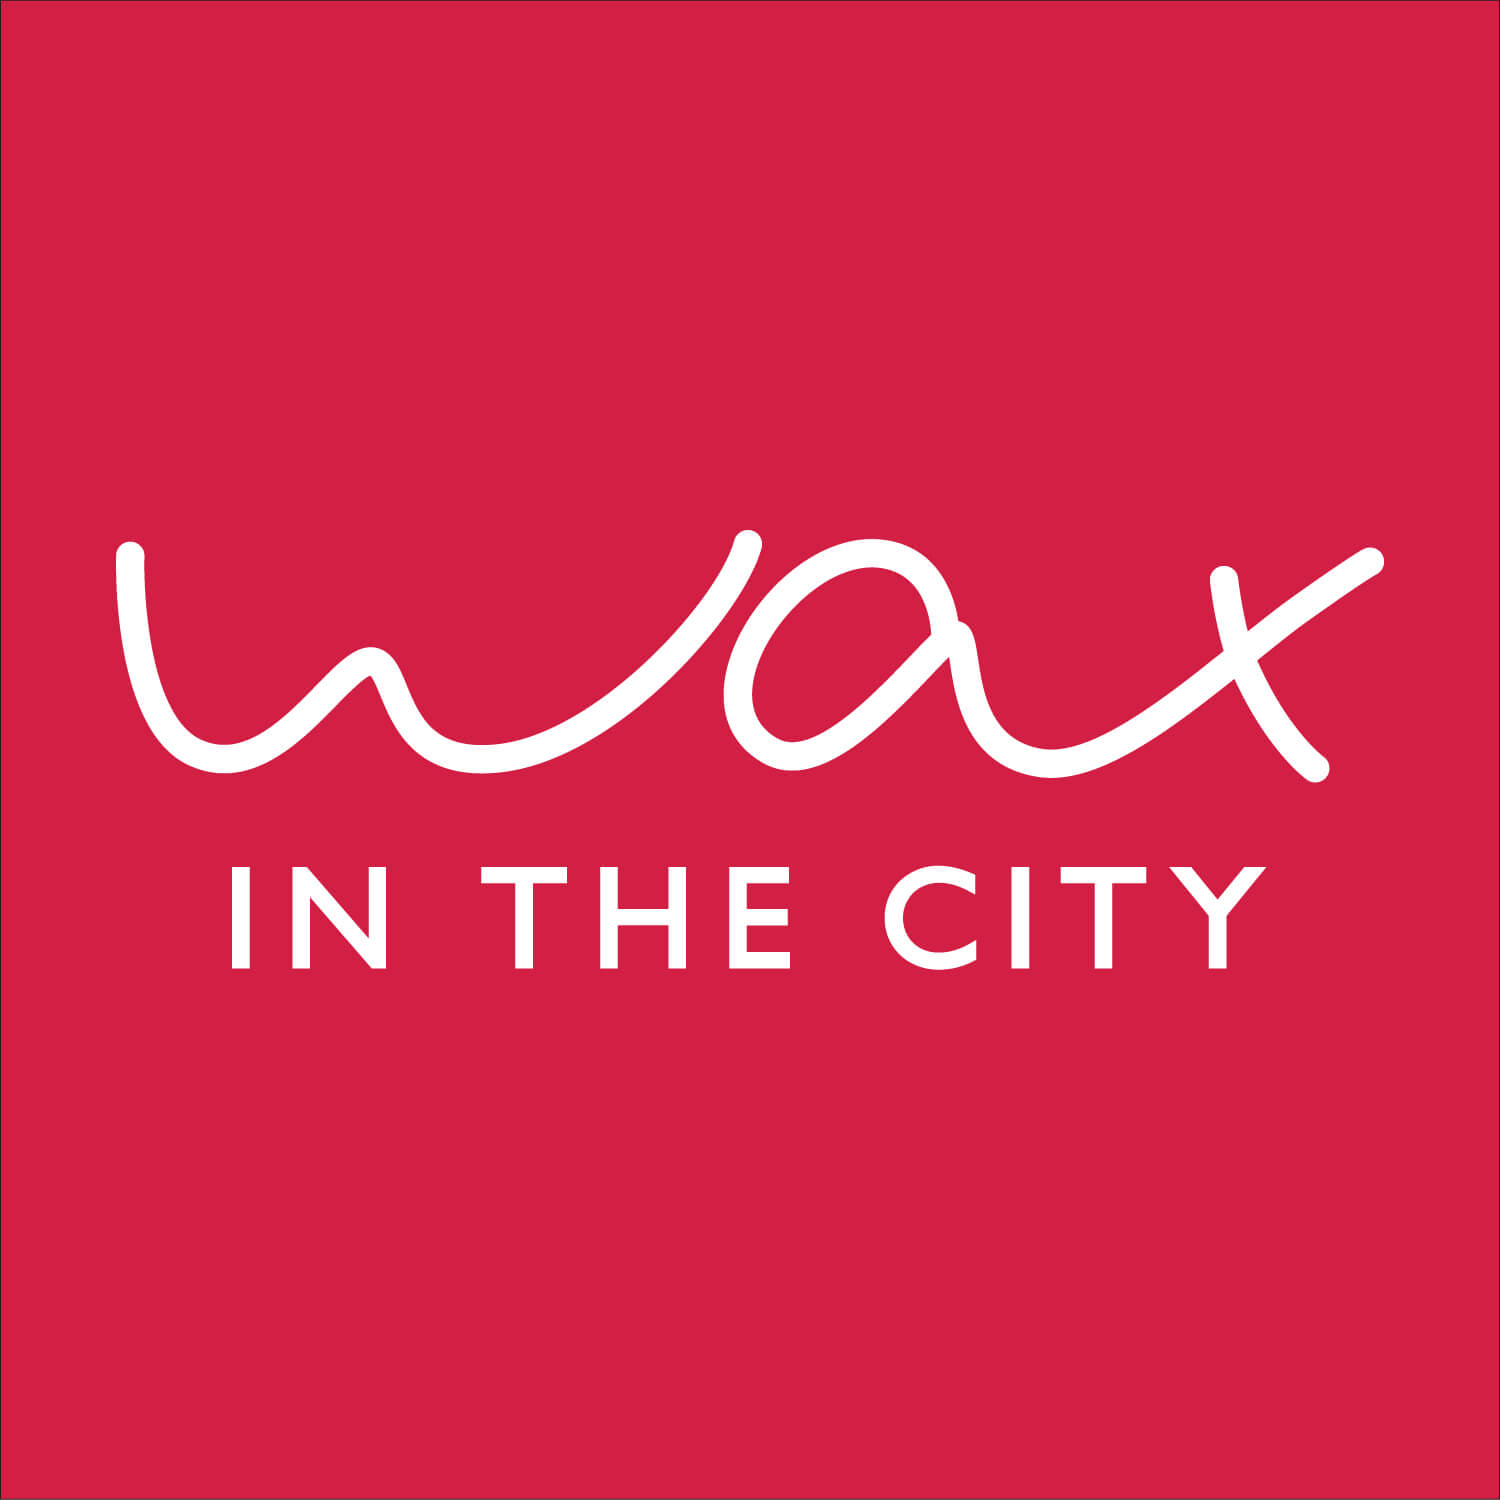 (c) Wax-in-the-city.com